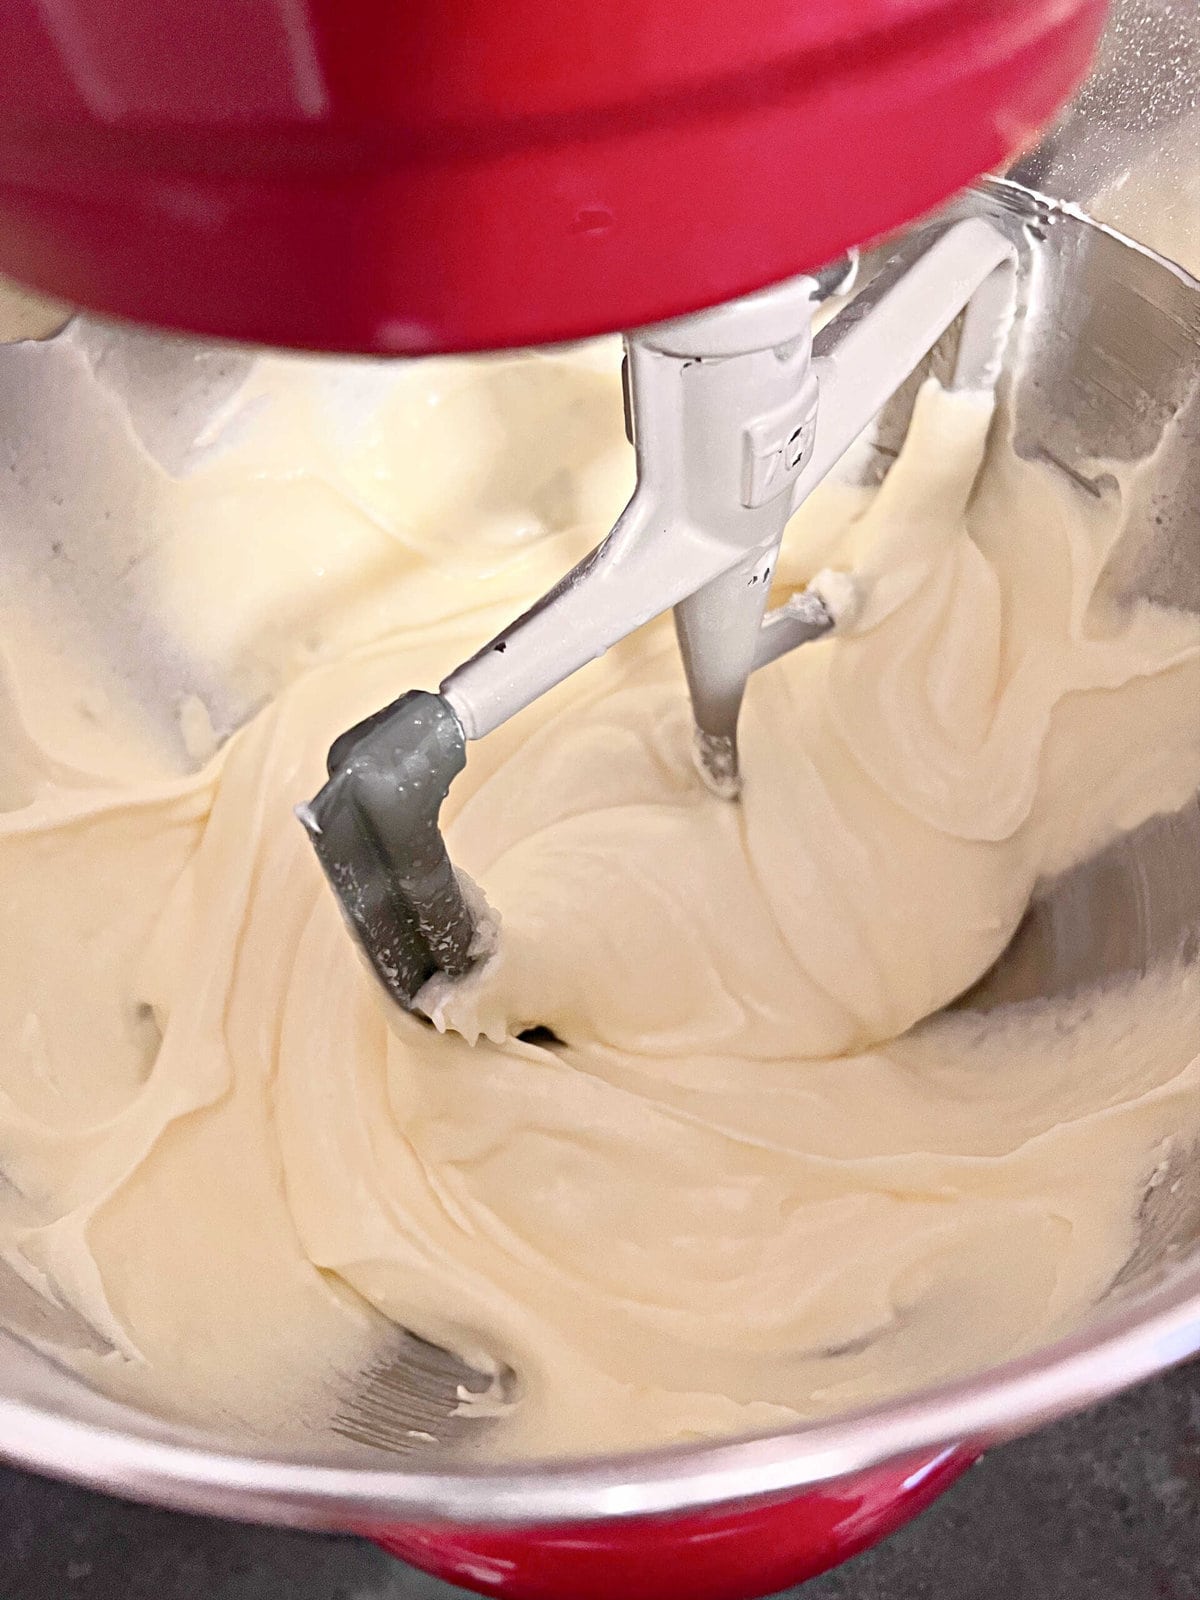 Batter after adding the eggs to the butter, cream cheese, and sugar mixture.